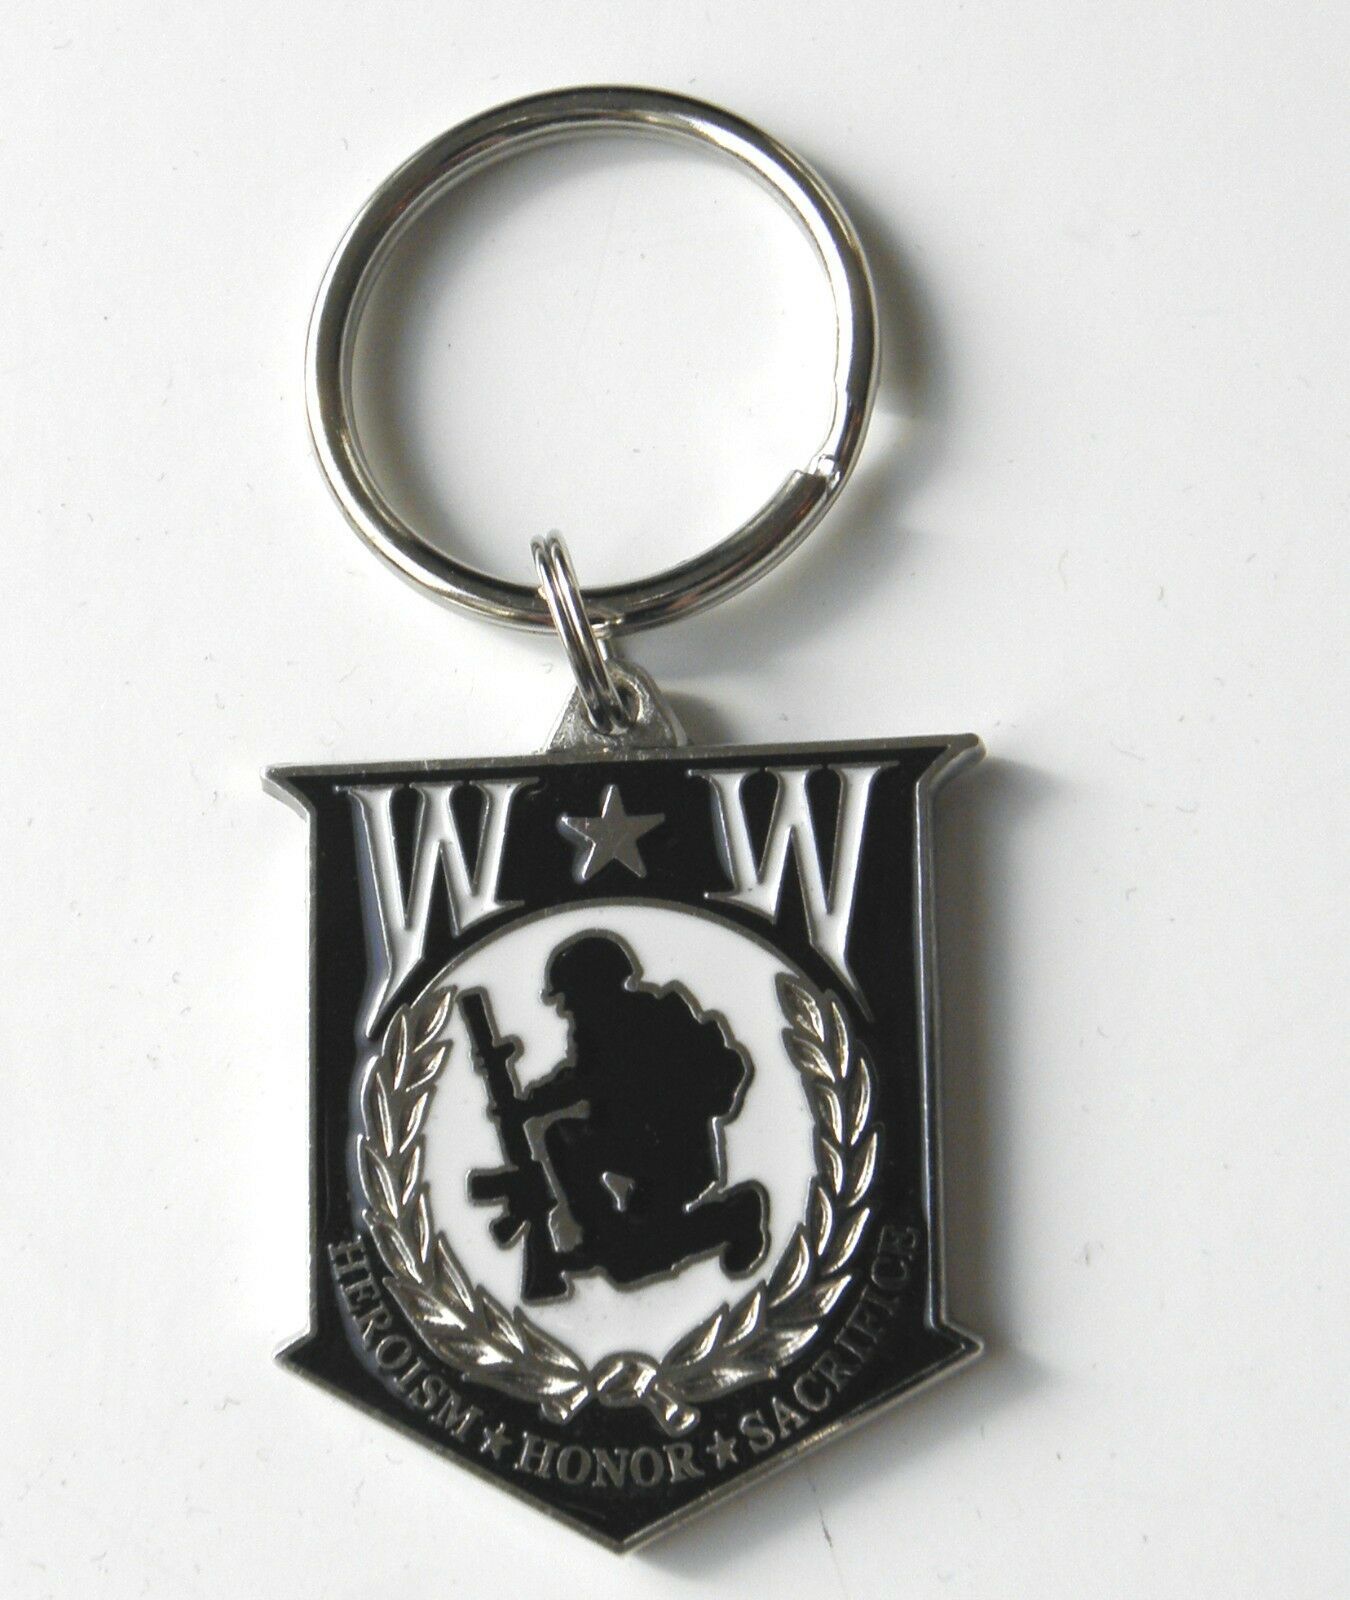 WOUNDED WARRIOR SPECIAL KEYRING KEY RING CHAIN 1.5 INCHES